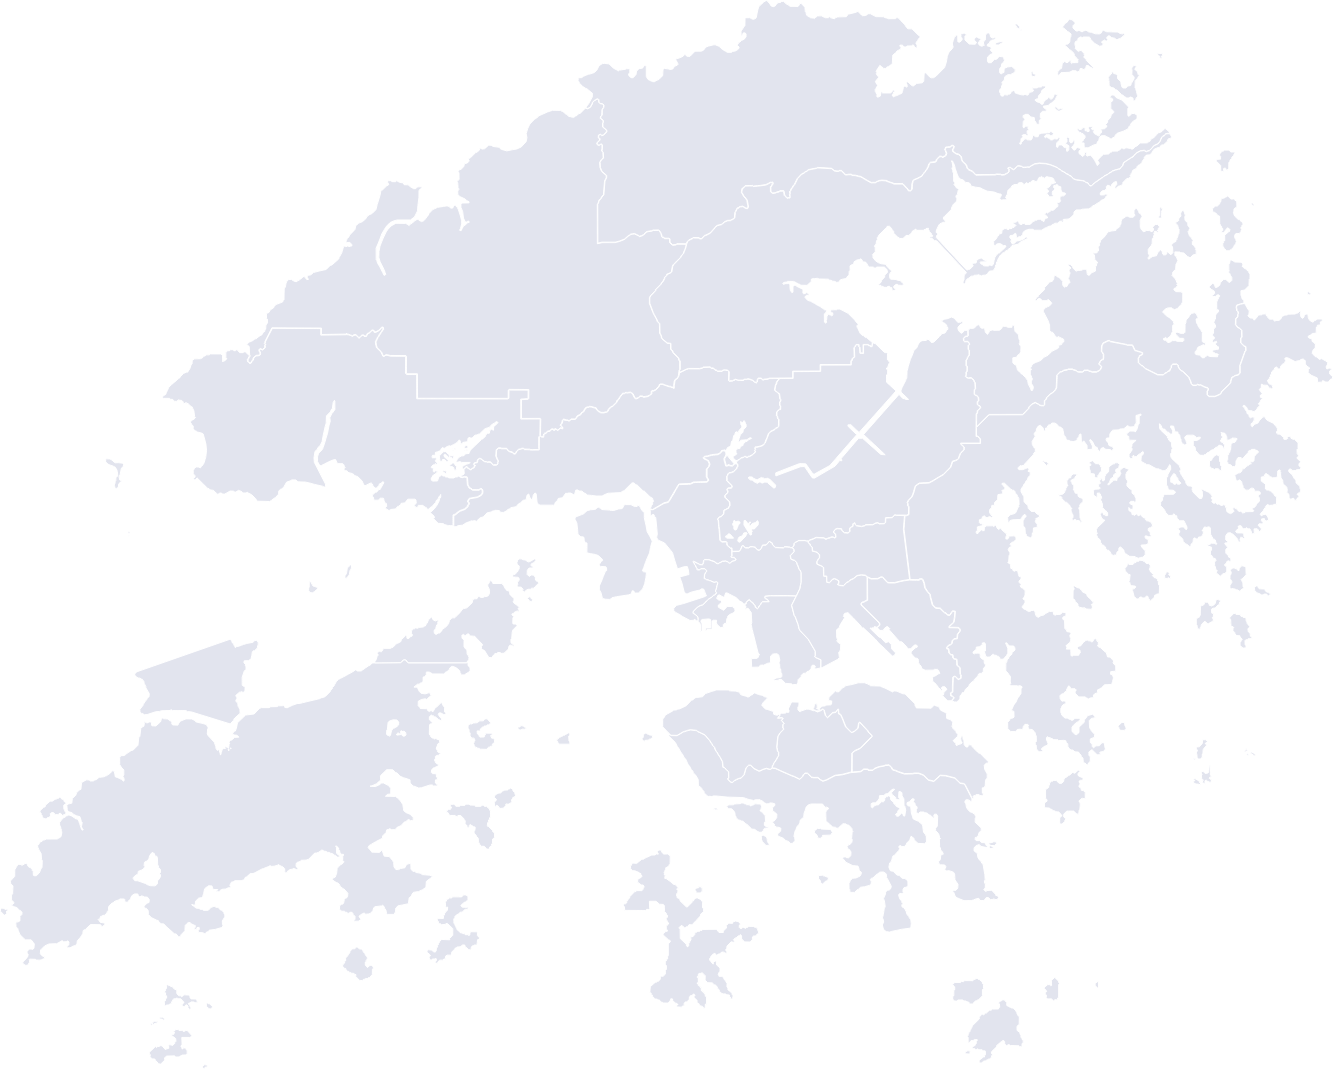 18 Districts